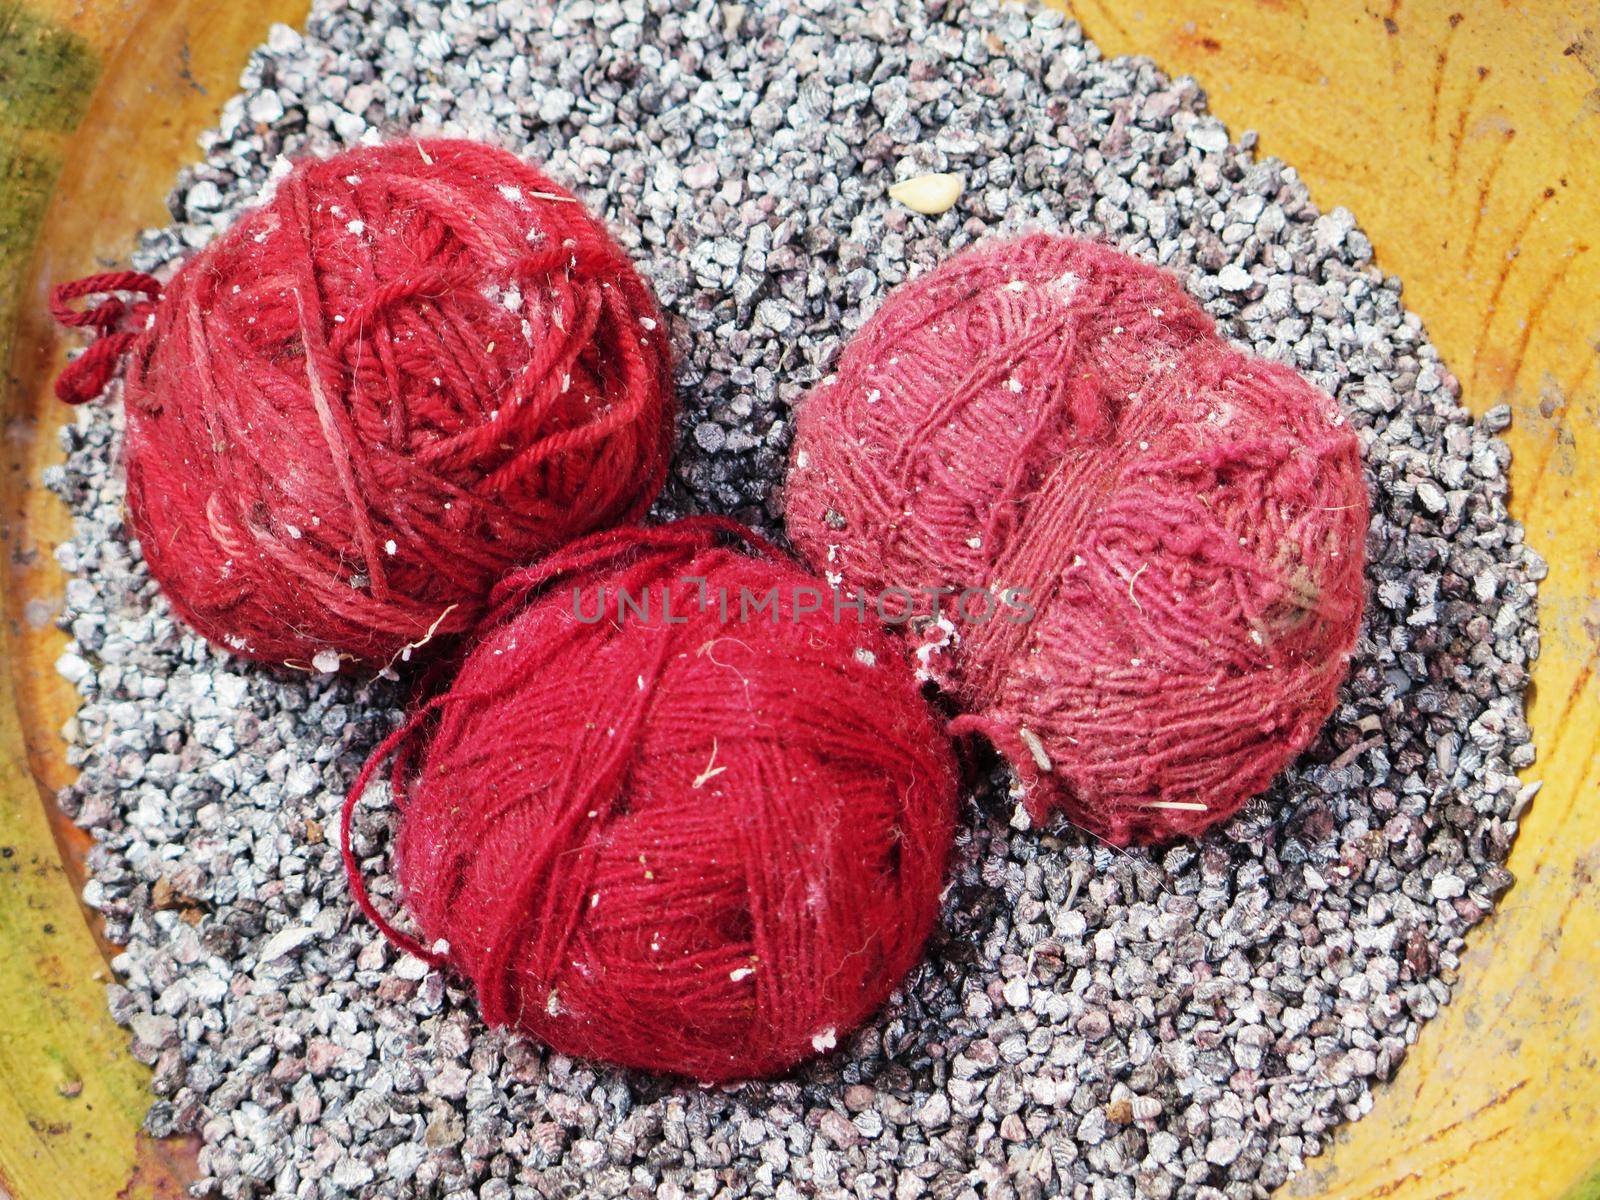 Natural dyed wool yarn in the peruvian Andes at Cuzco by aroas